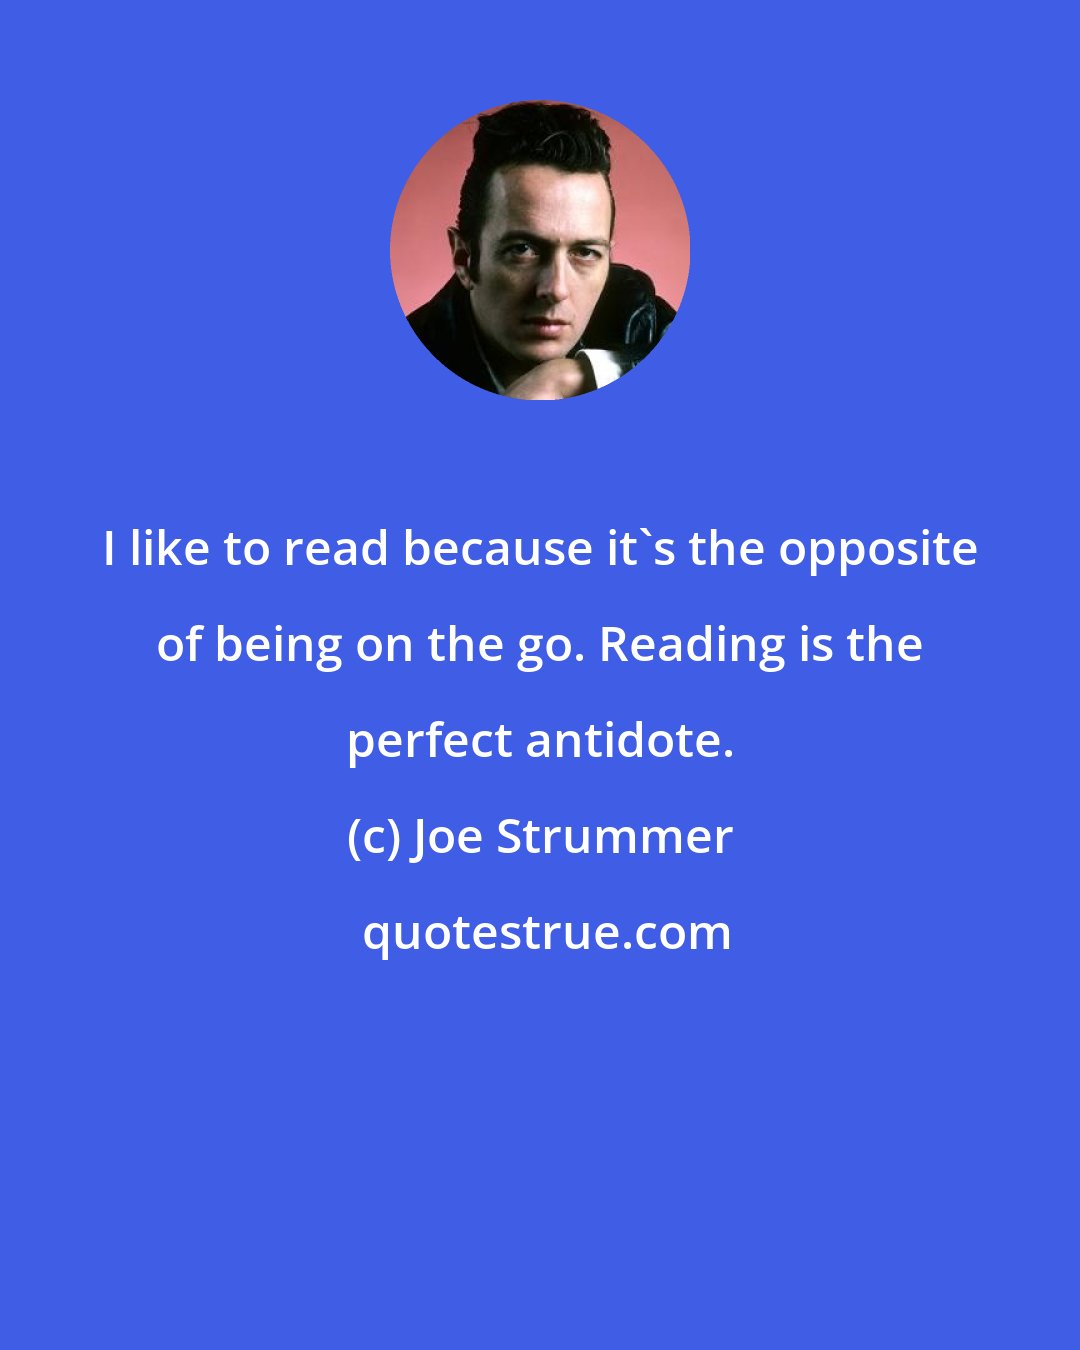 Joe Strummer: I like to read because it's the opposite of being on the go. Reading is the perfect antidote.